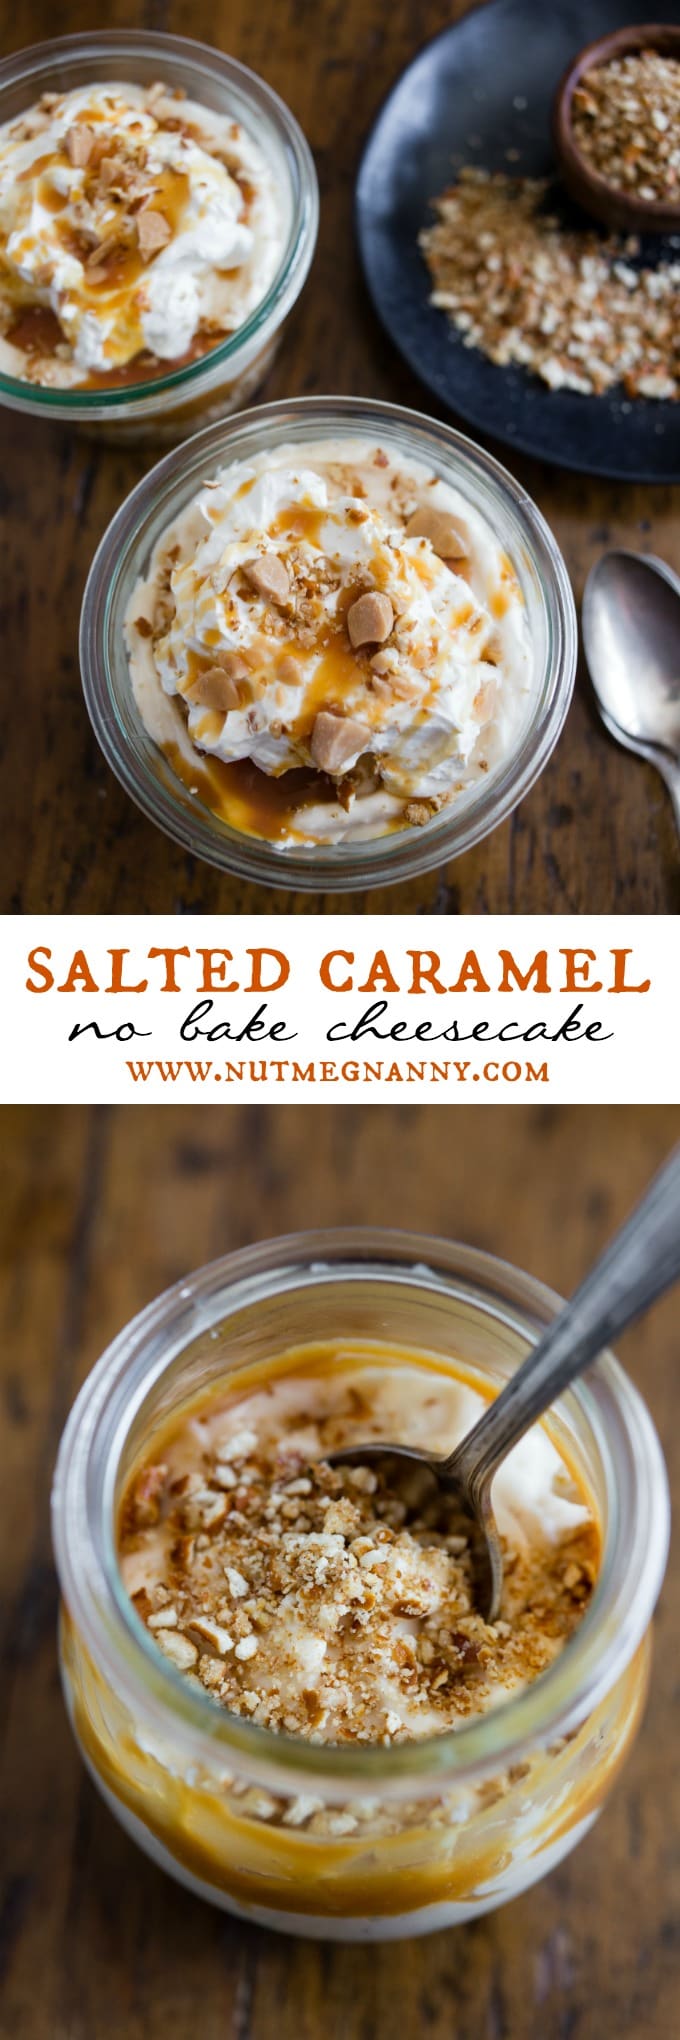 This salted caramel no bake cheesecake is ready in under 30 minutes and sure to impress all your guests. Plus it's packed full of delicious salted caramel flavor overtop a crushed pretzel crust. You'll love this!